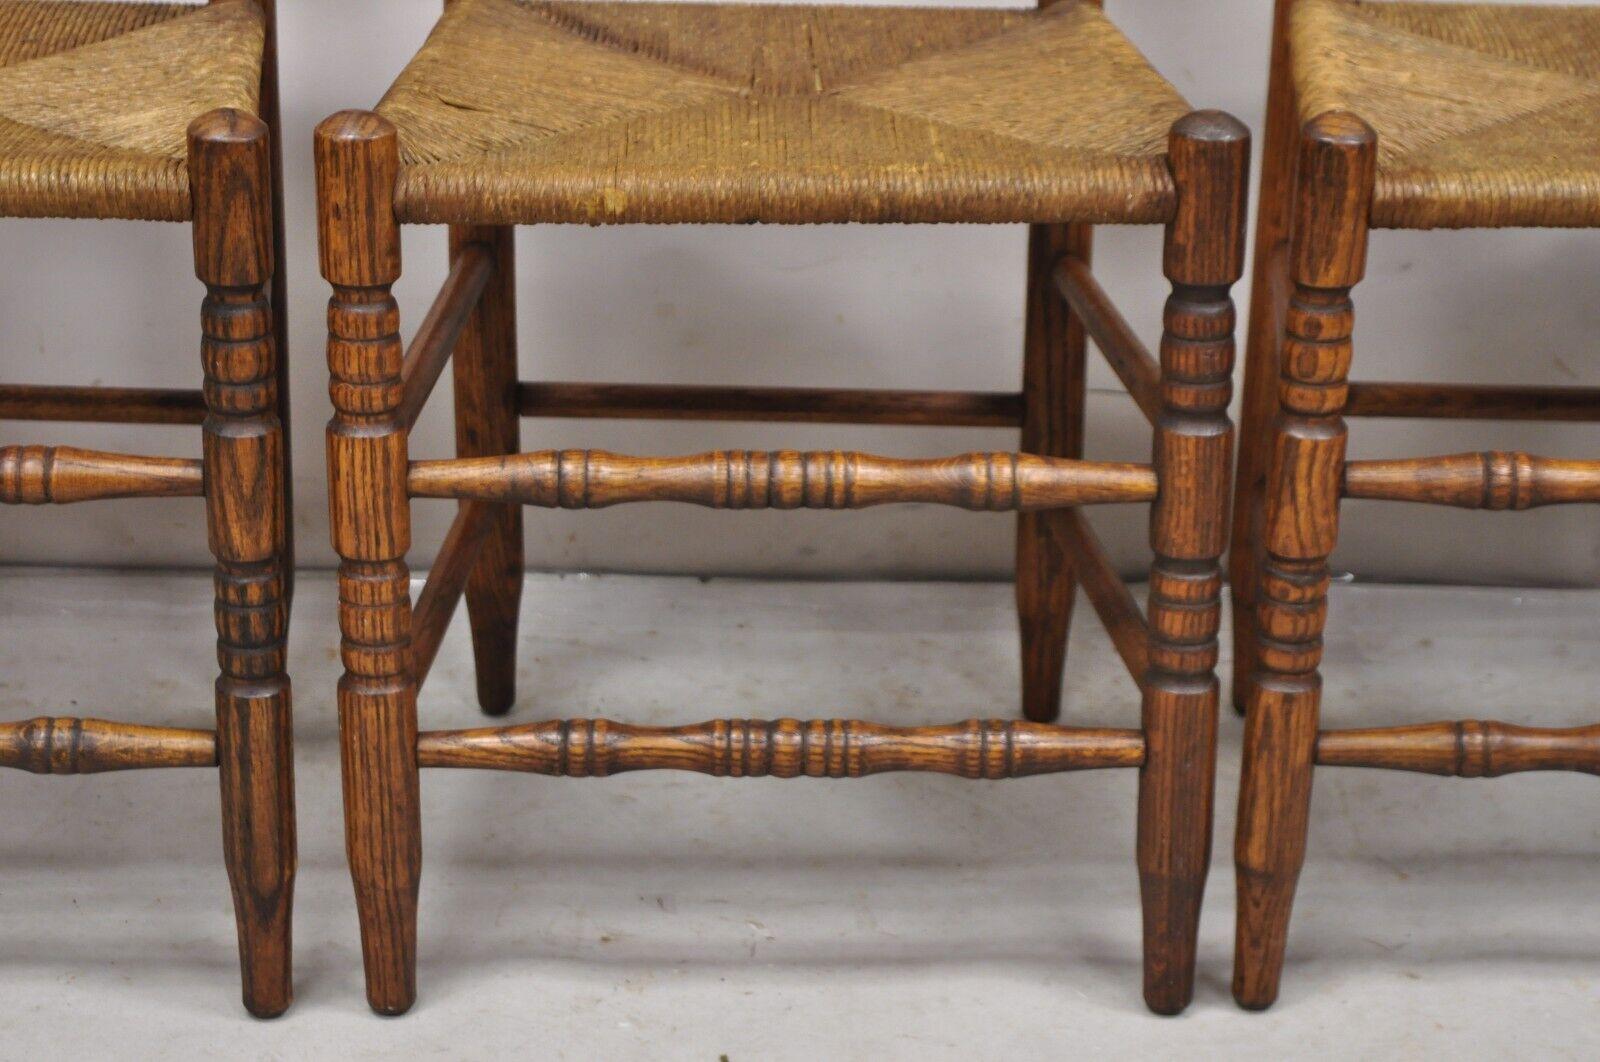 Antique Ladderback Primitive Rustic Oak Wood Rush Seat Dining Chairs - Set of 4 For Sale 1